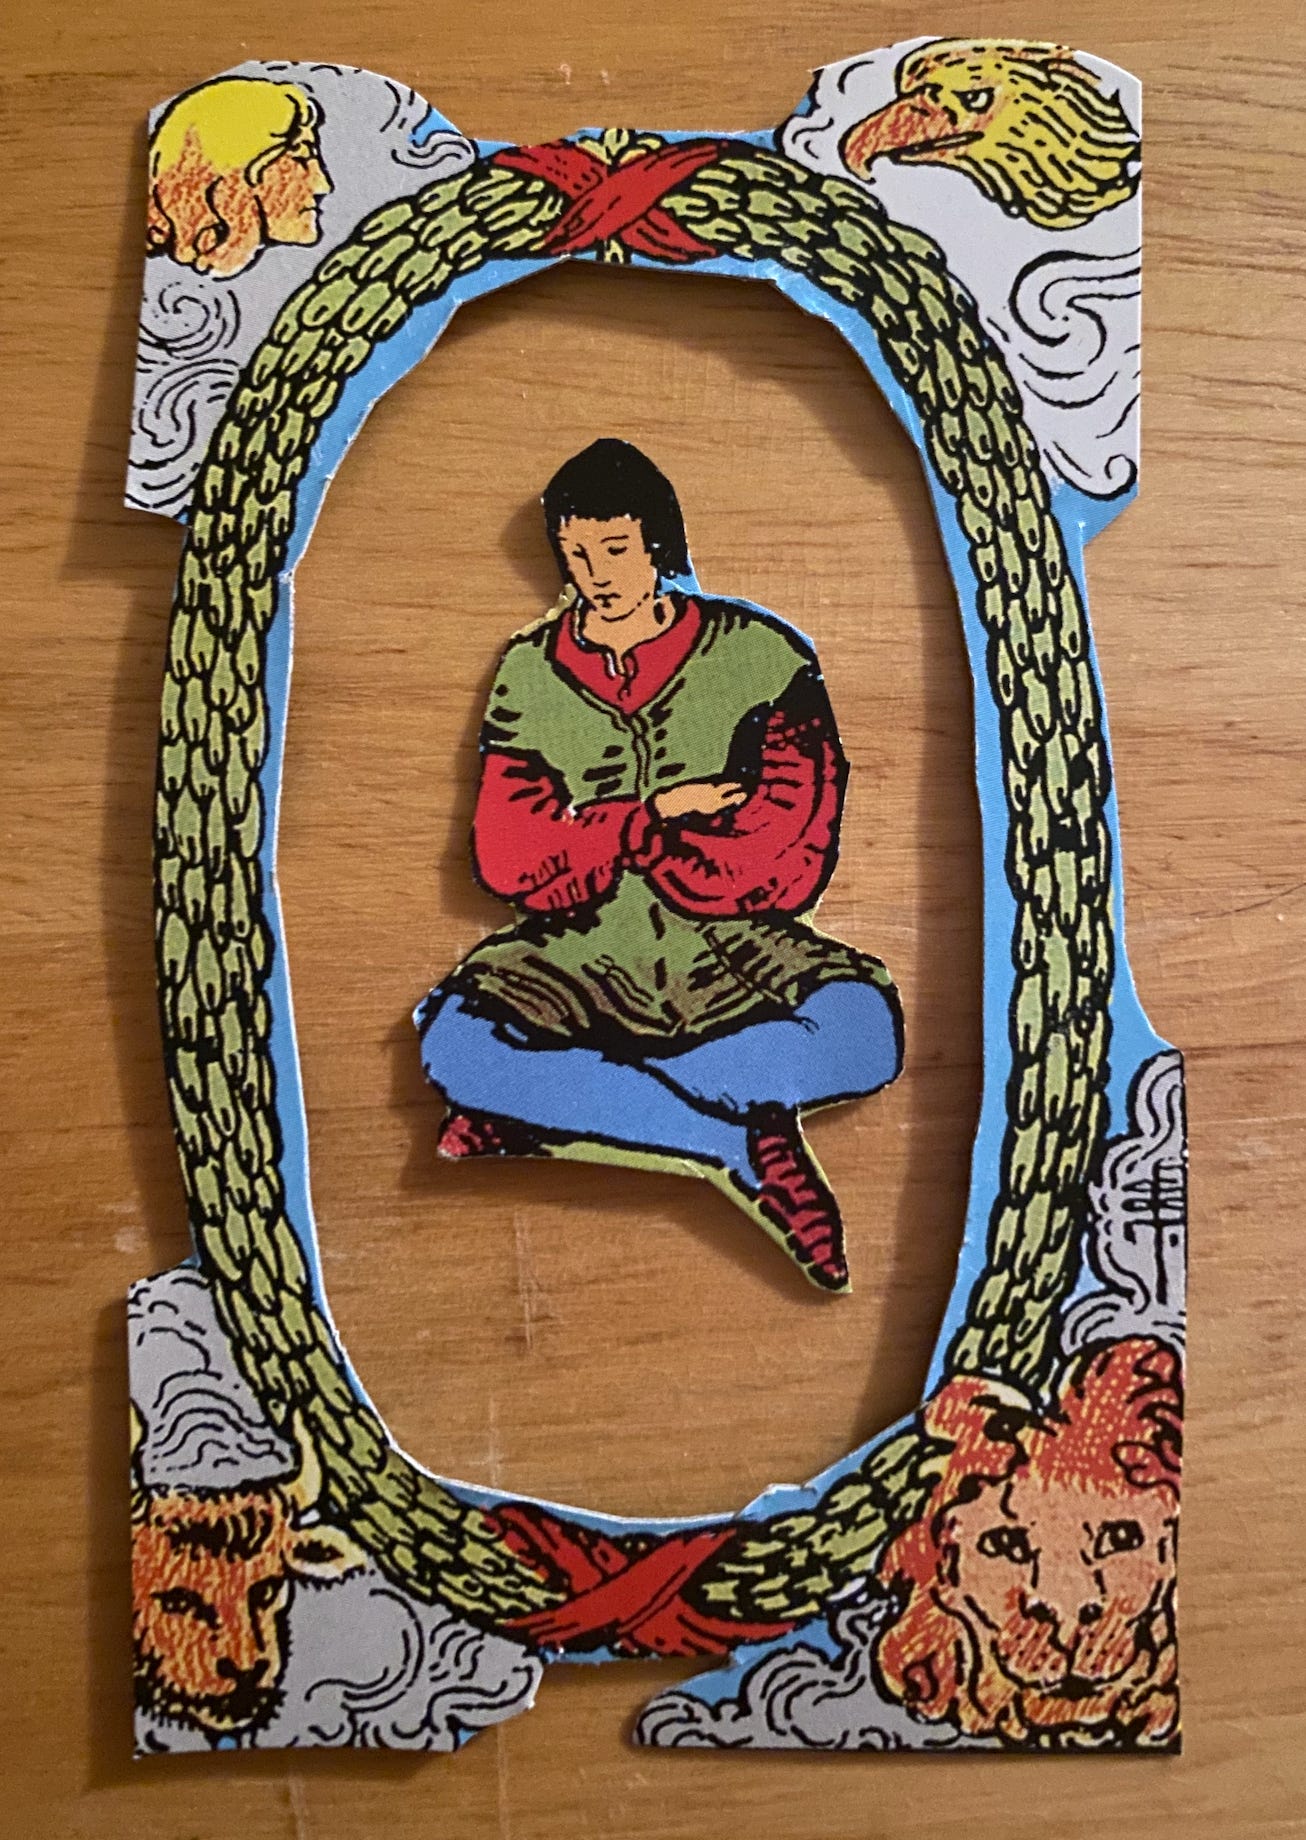 pensive person inside of wreath